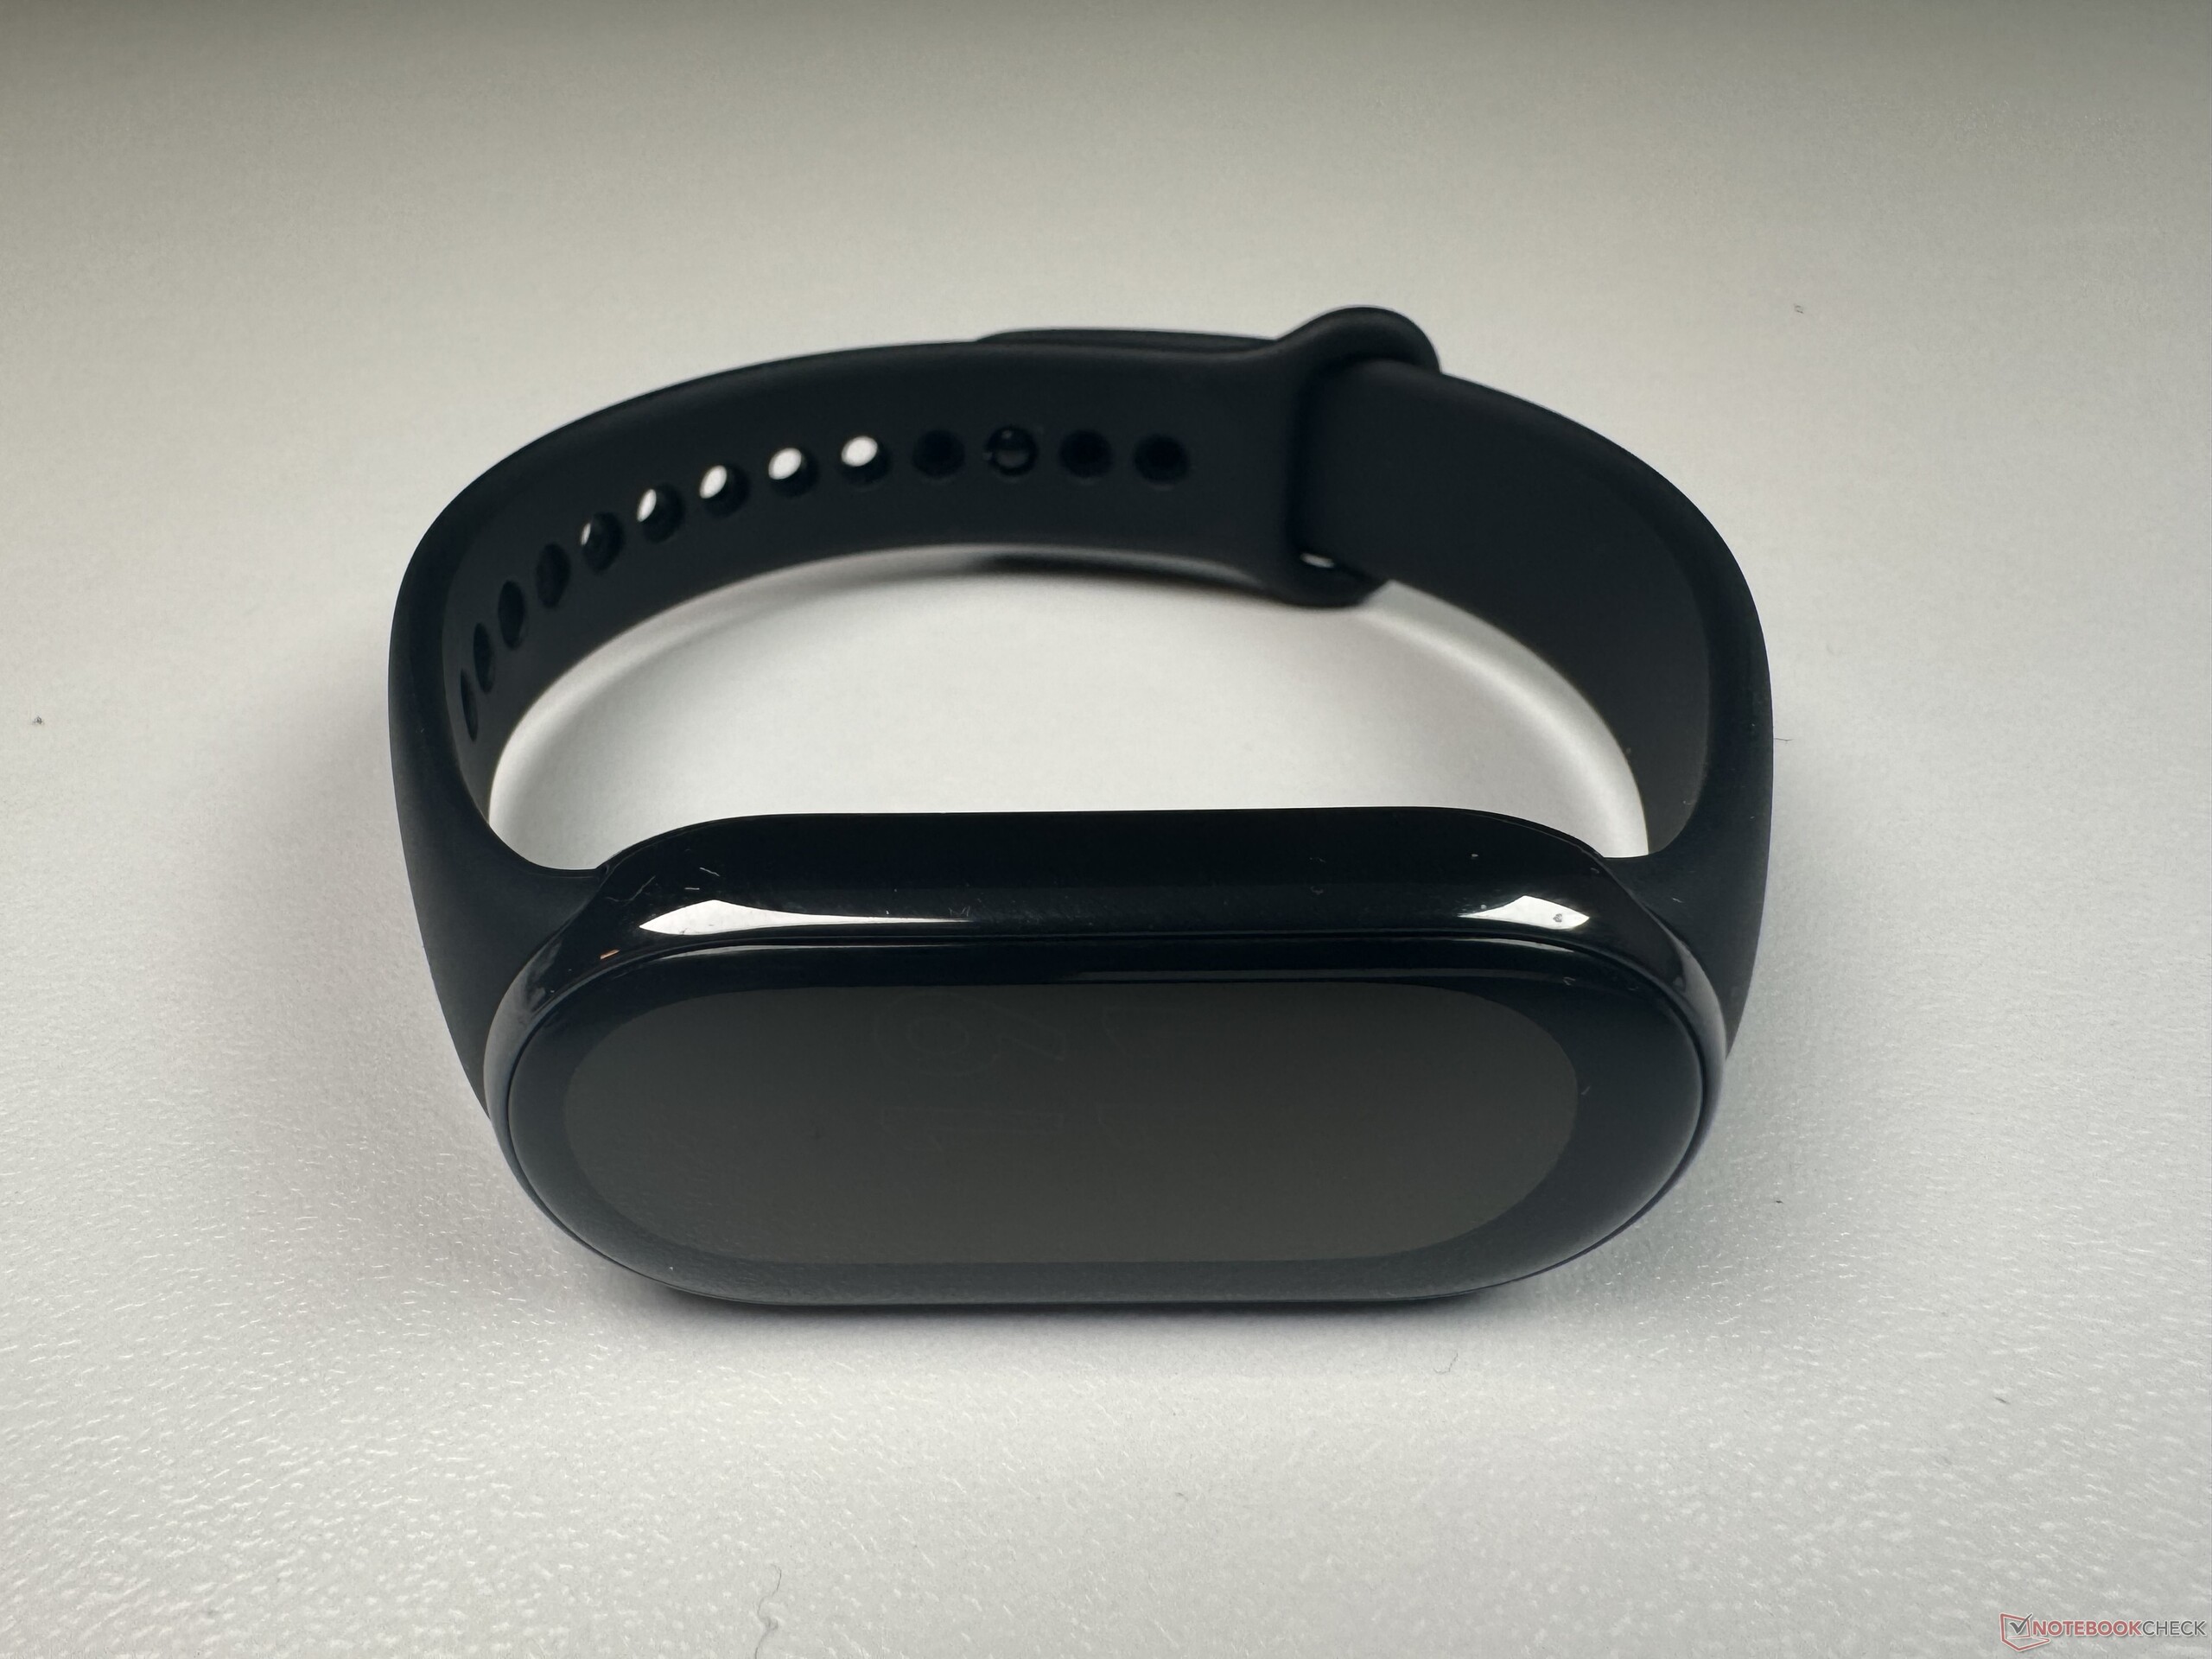 Xiaomi Mi Band 2 - Review - Full specification - Where to buy?